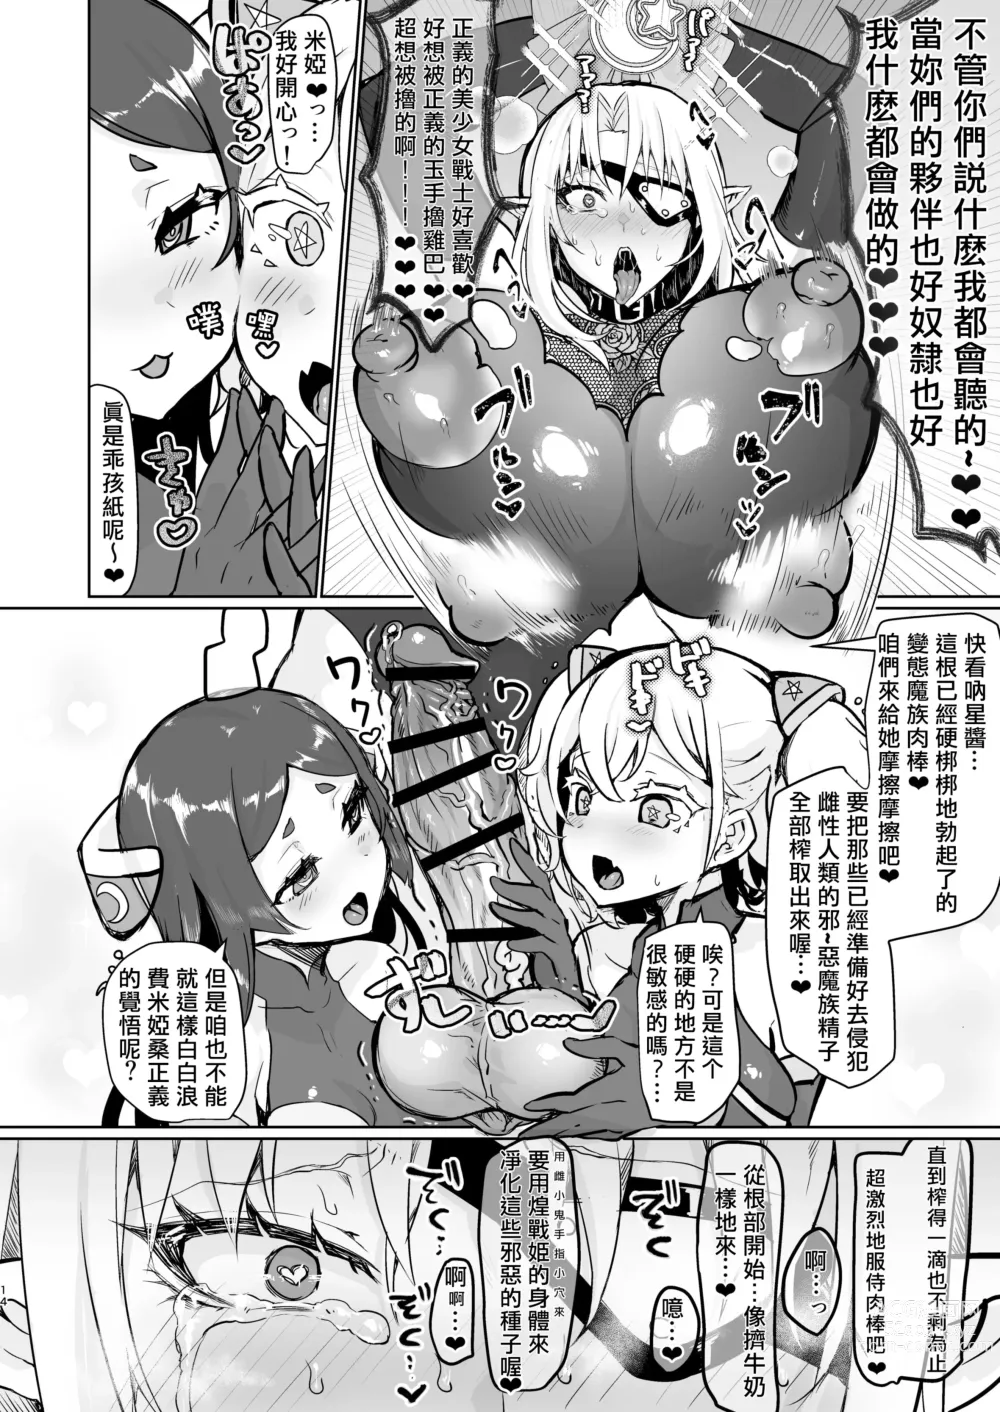 Page 14 of doujinshi 邪恶组织女干部正堕